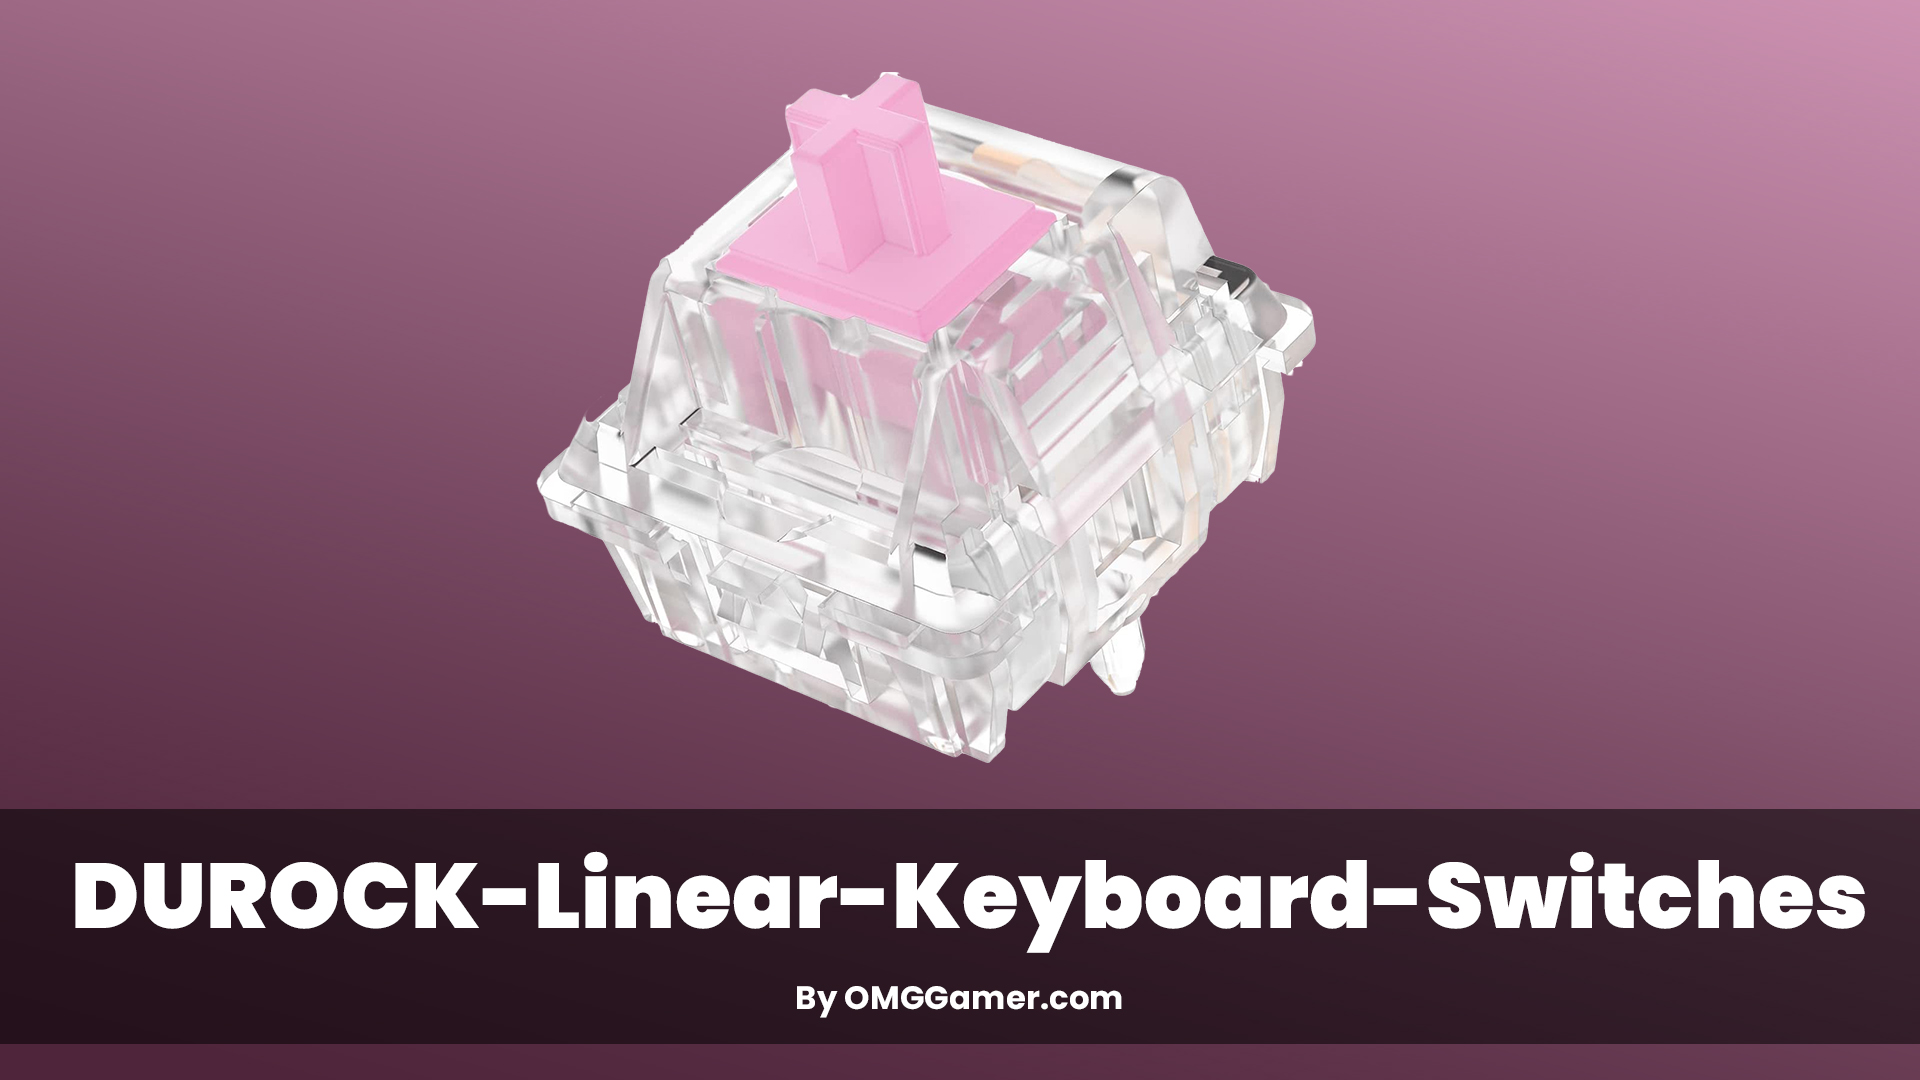 DUROCK Linear Keyboard Switches